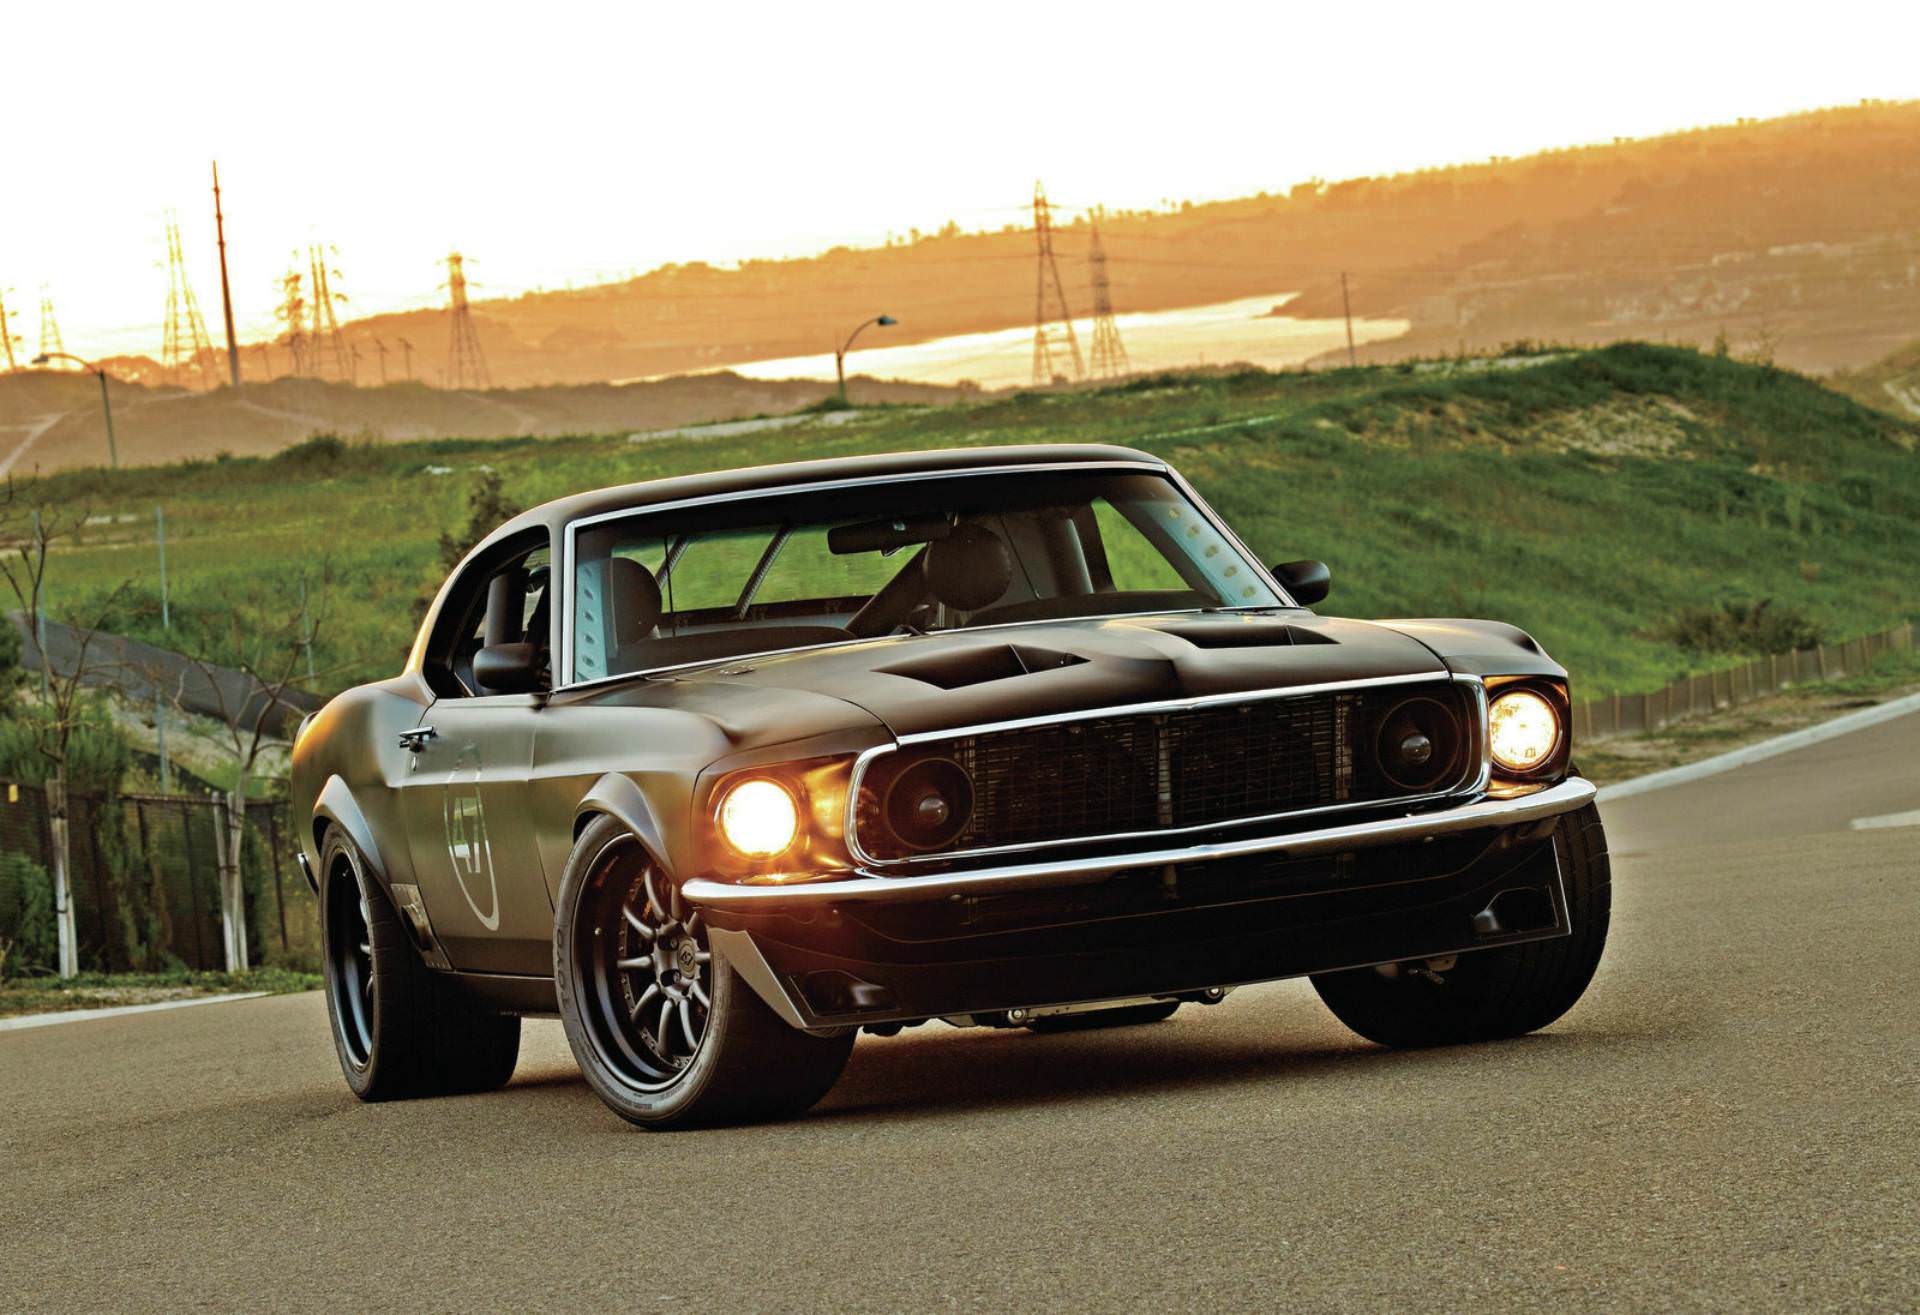 Ford Classic Cars Wallpapers